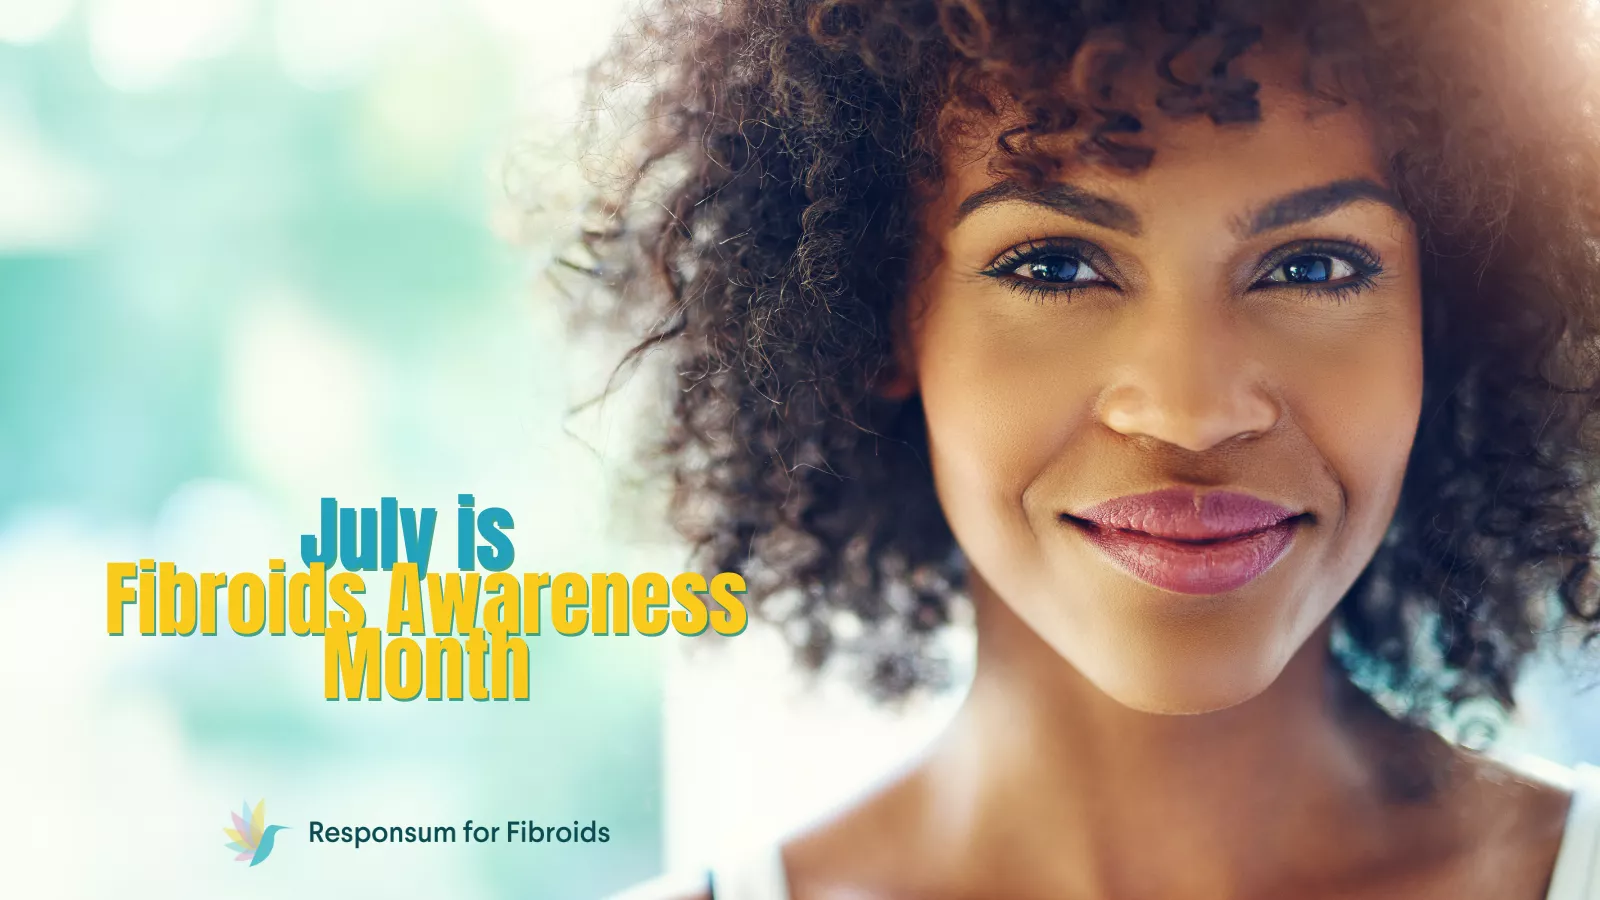 July is Fibroids Awareness Month: Why It’s Important and How to Show Your Support